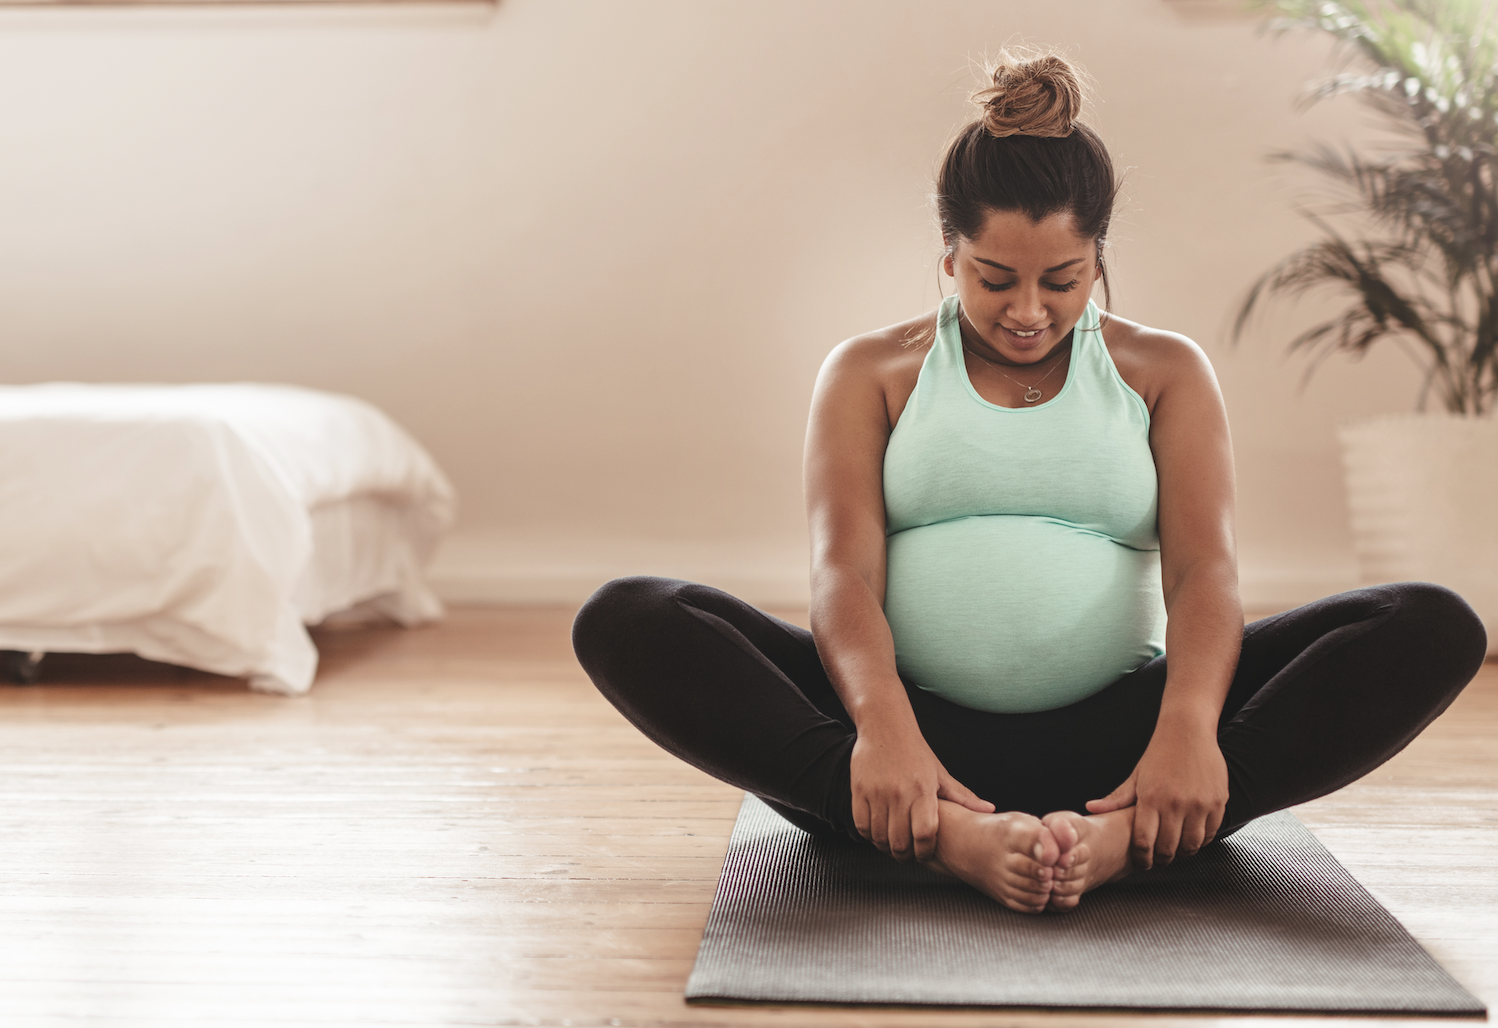 Pregnant woman stretching on the floor